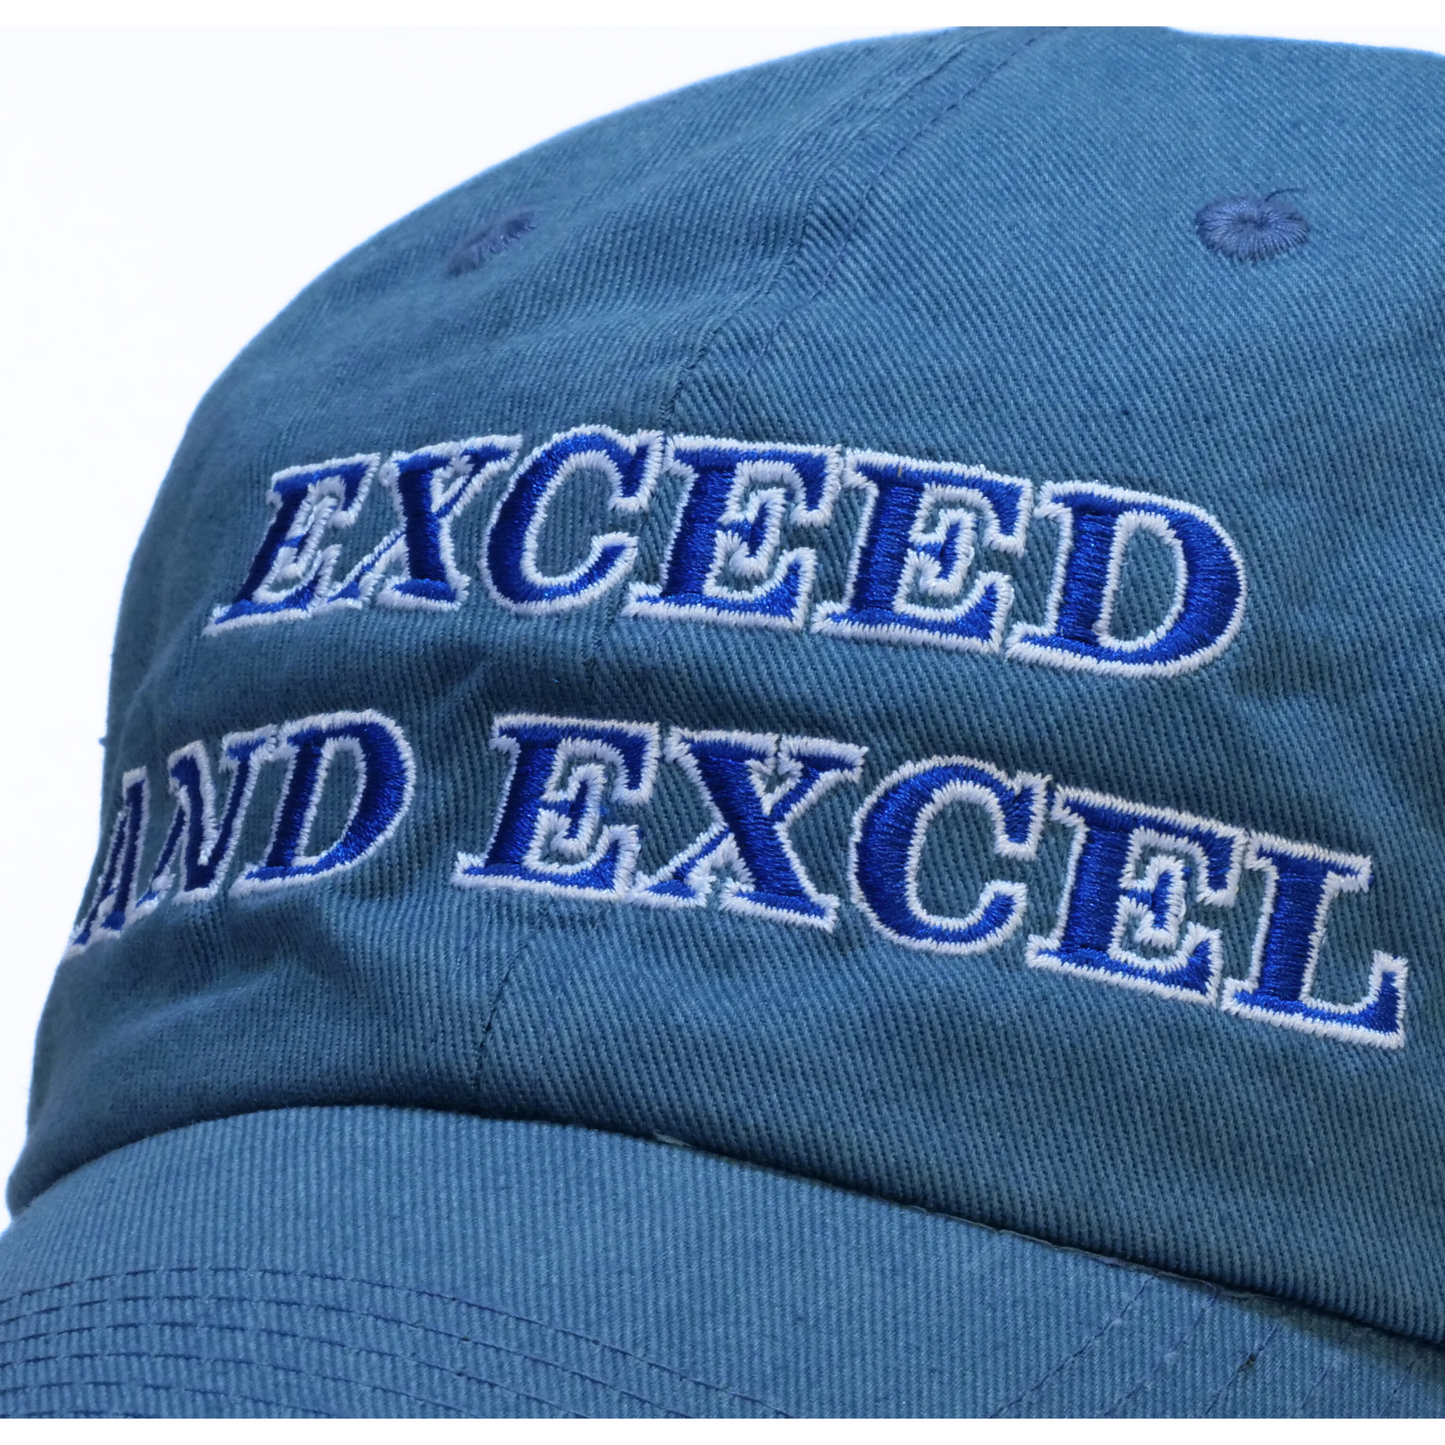 Exceed And Excel Baseball Cap - Darley